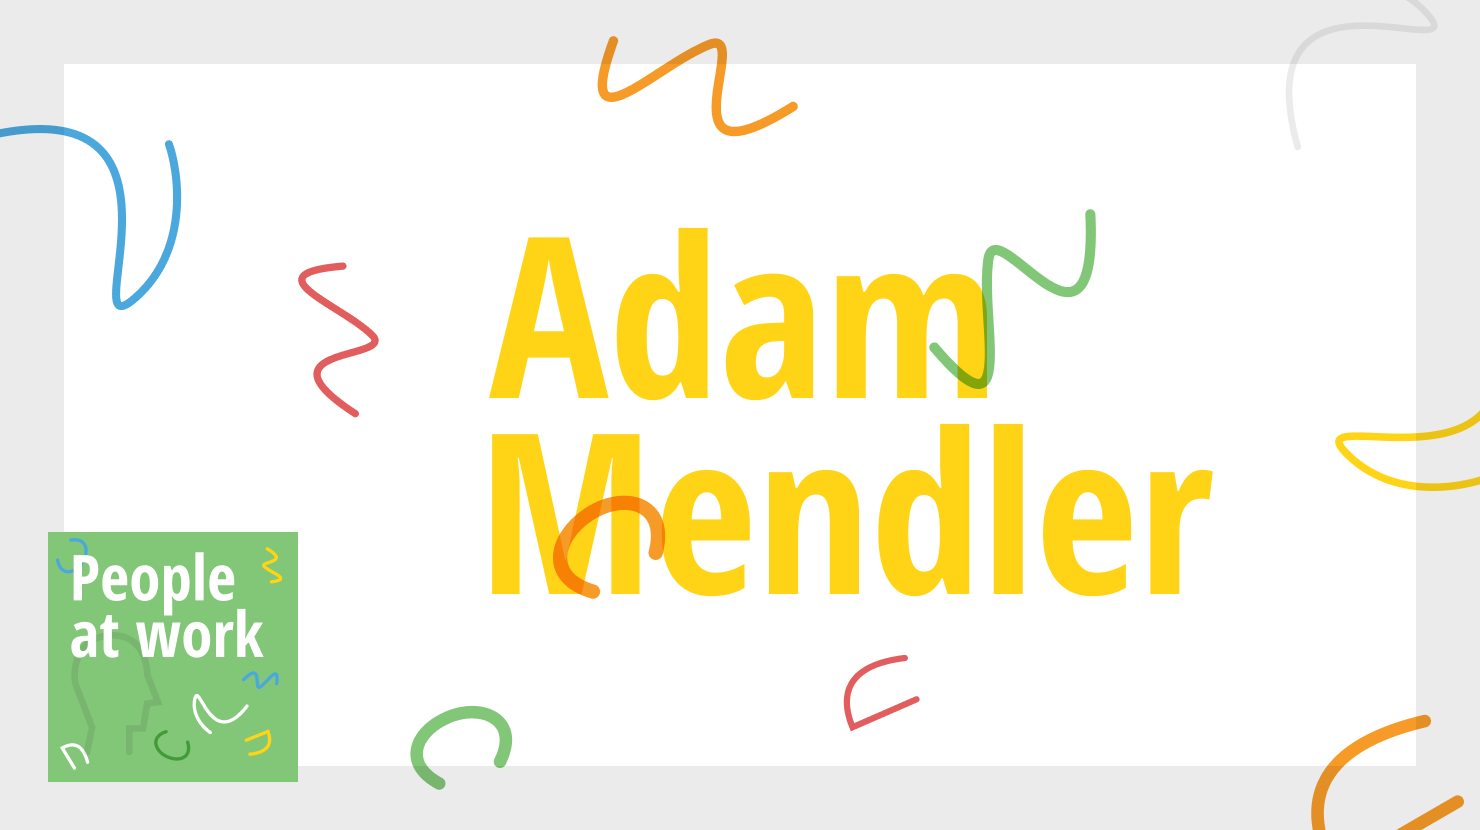 The playbook for truly great leadership with Adam Mendler